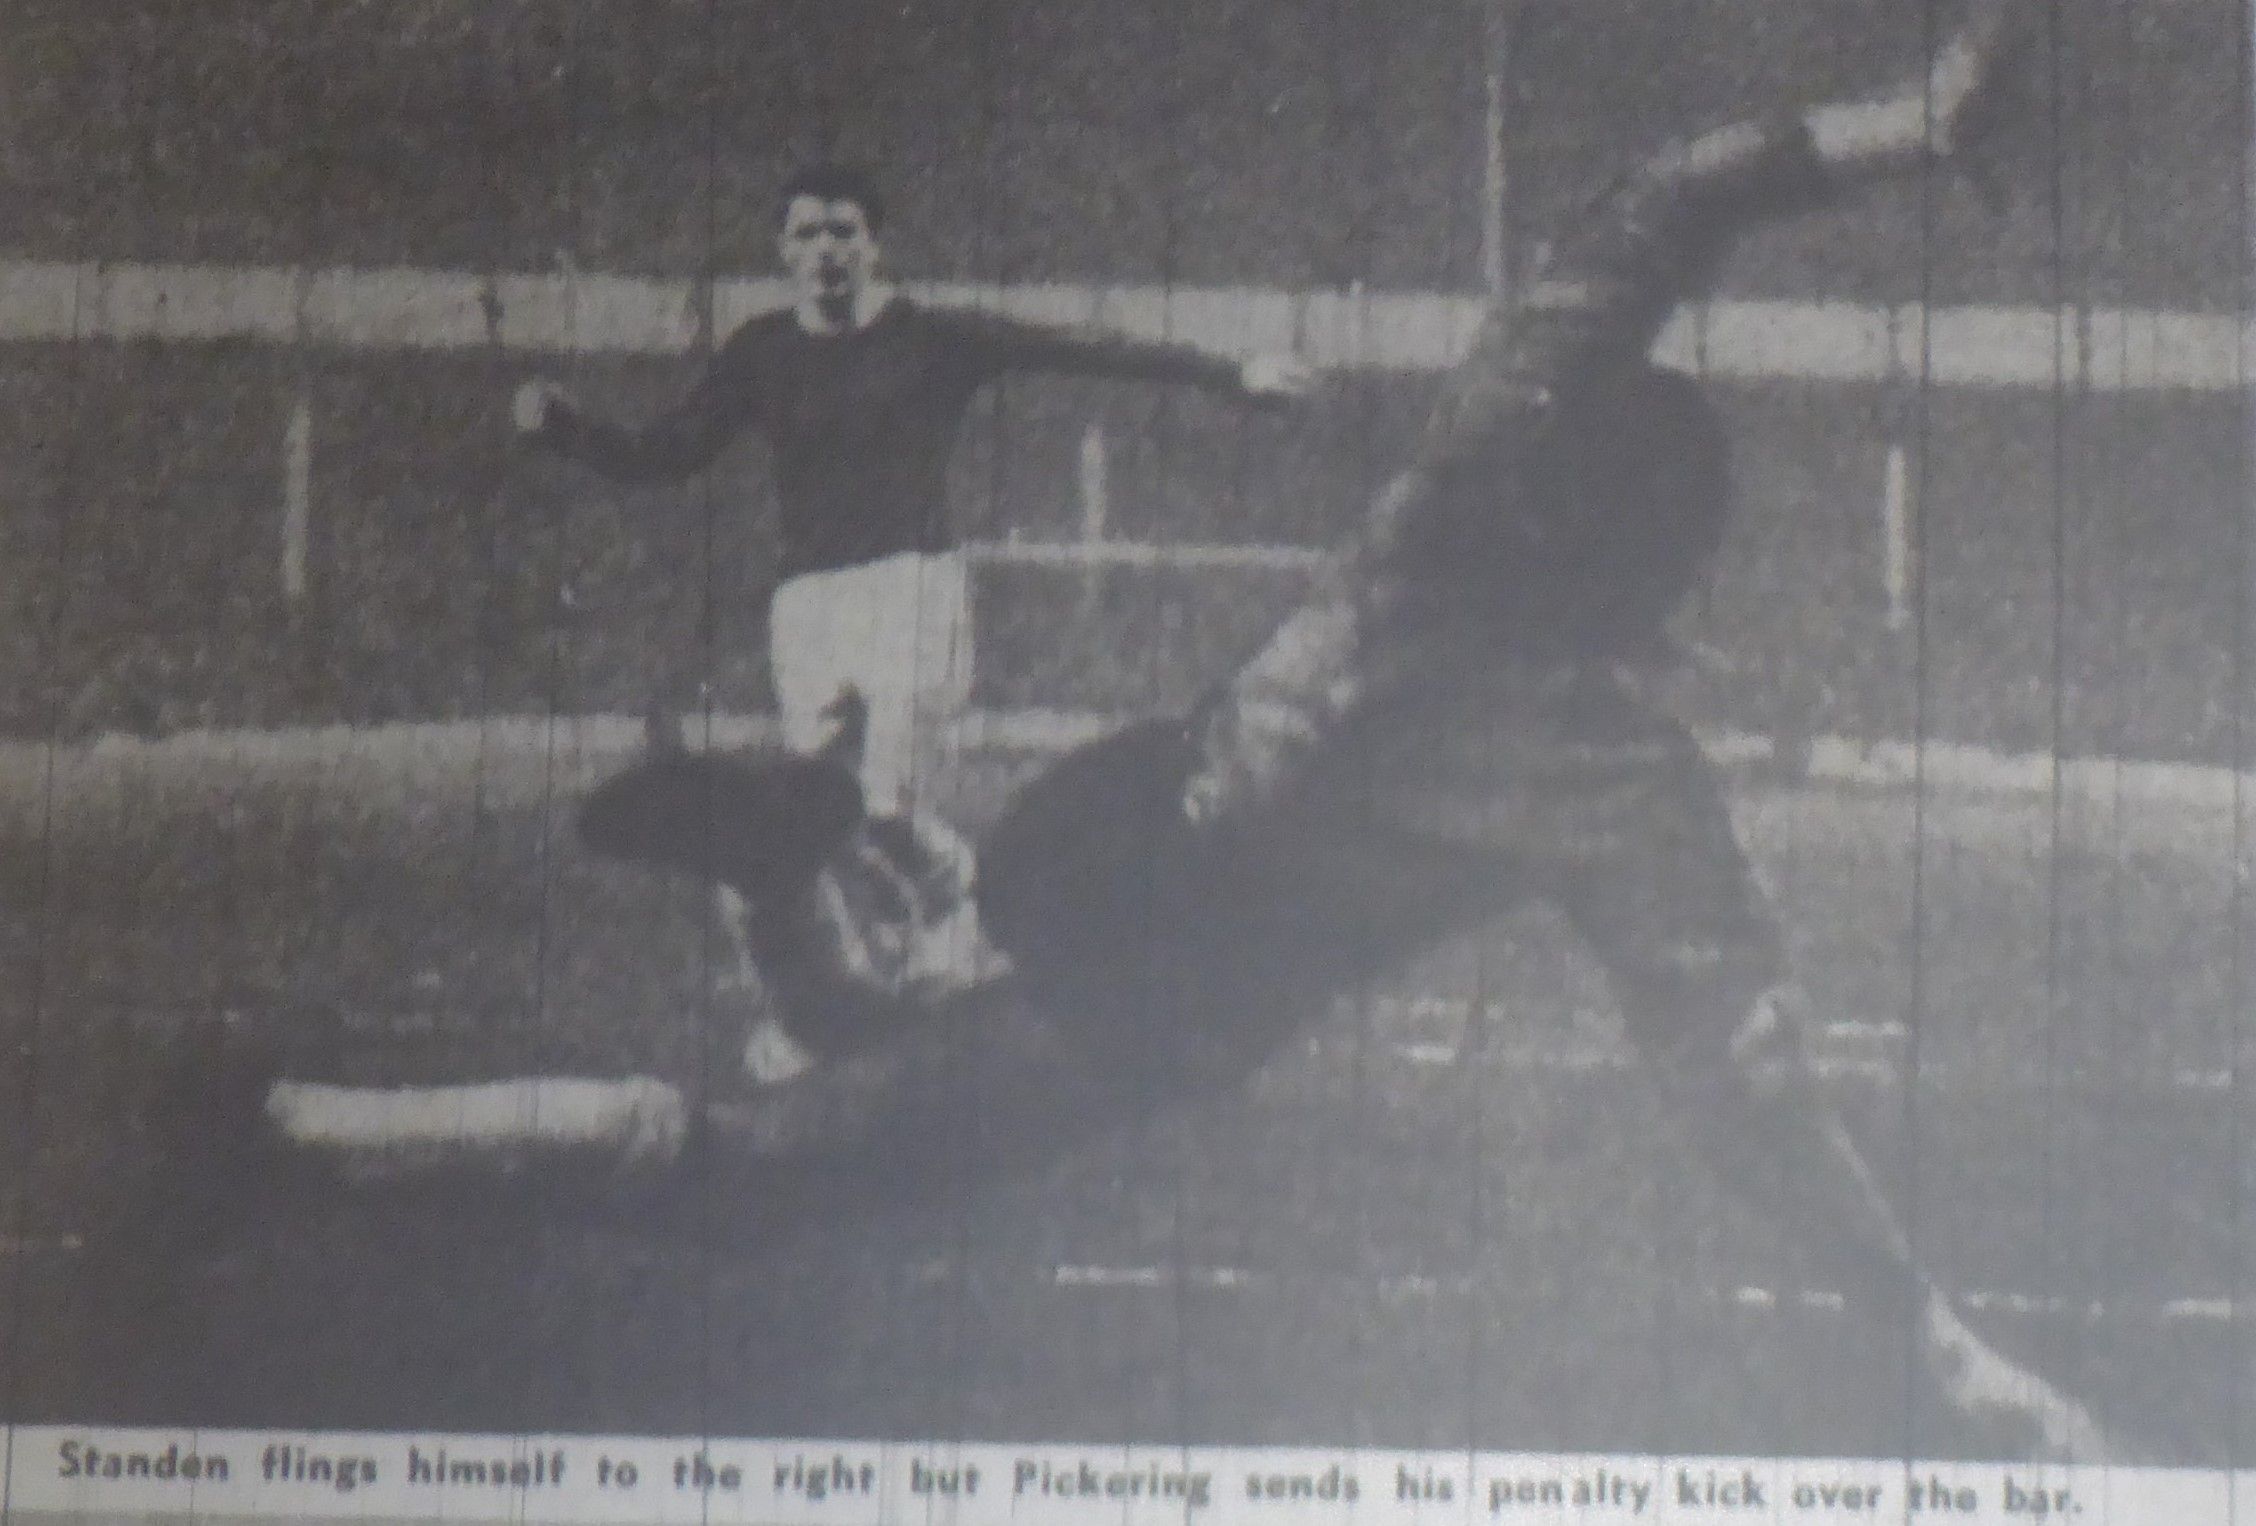 1132a 11.01.66 Pickering MISSES a penalty against West Ham.JPG